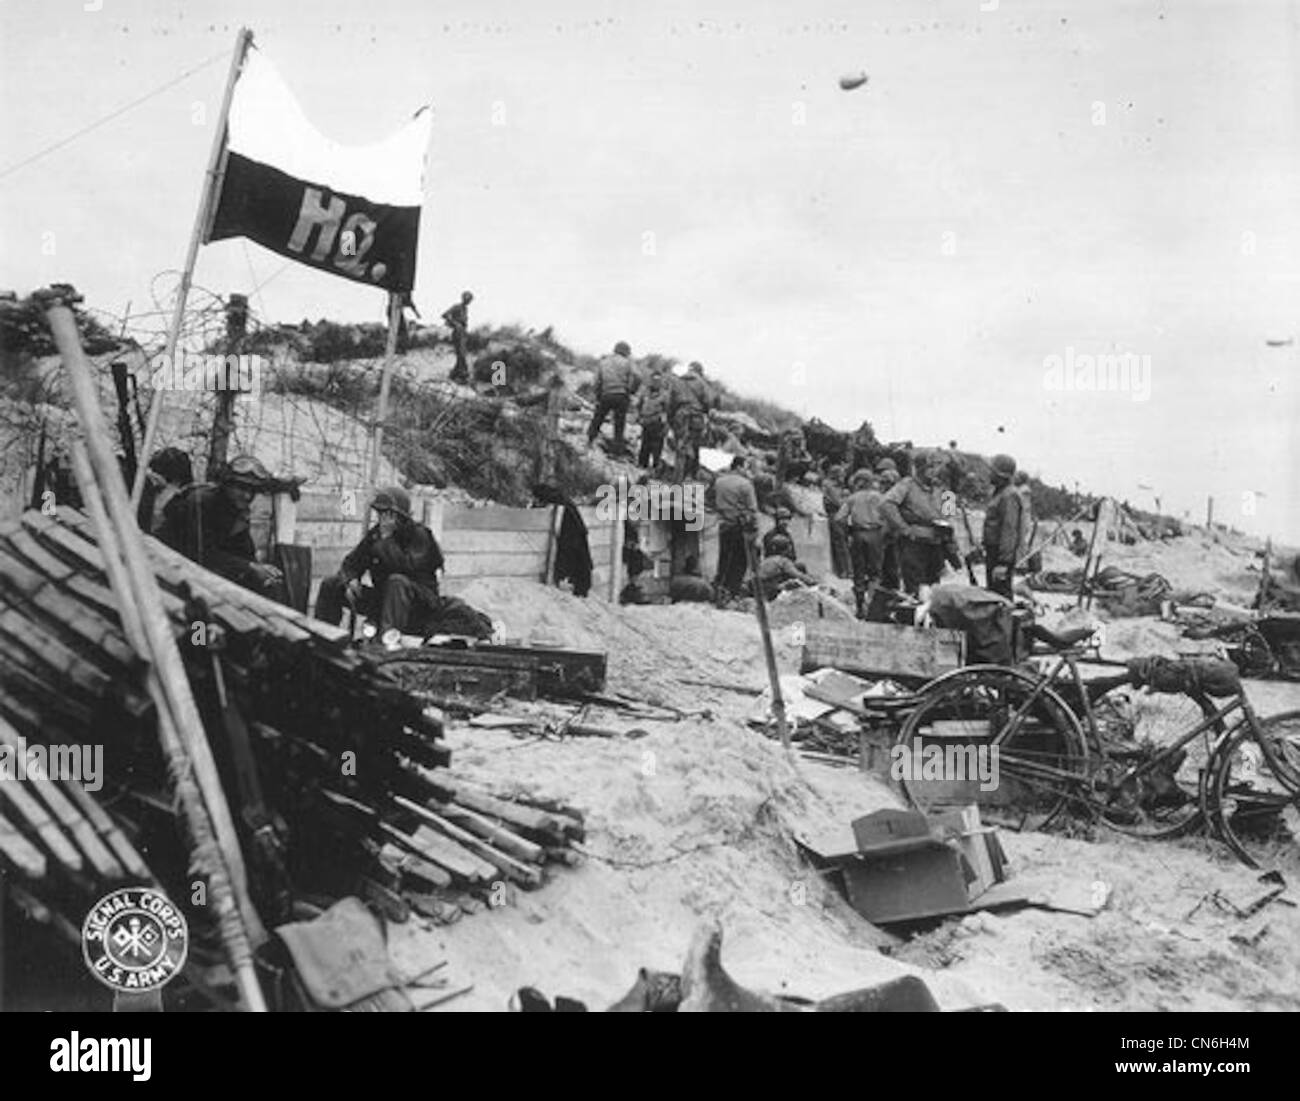 Normandy World War Two 6th june 1944 Stock Photo - Alamy